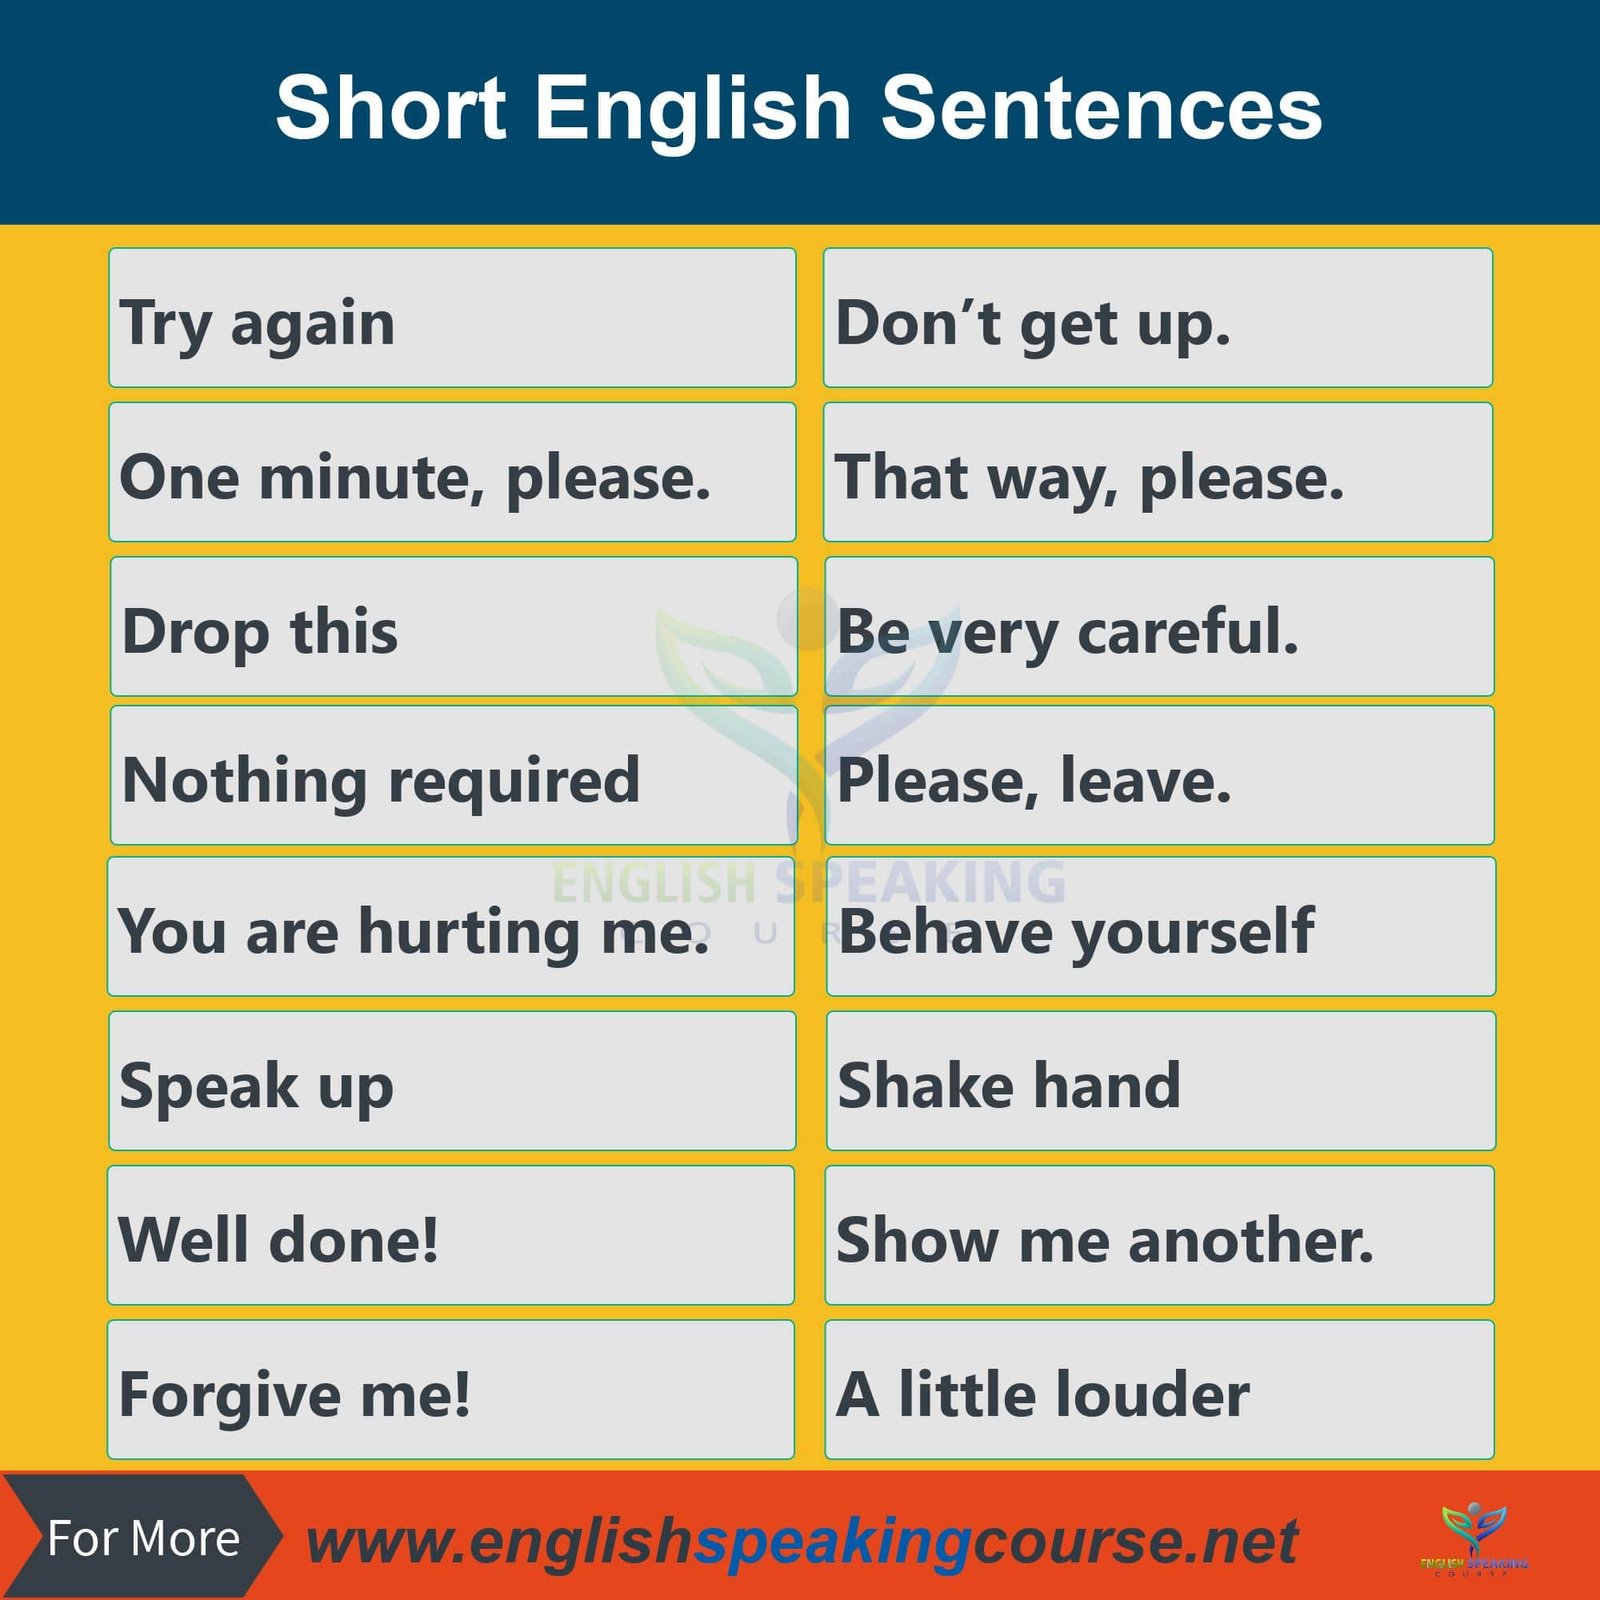 Short sentences. English sentences used in Daily Life. Funny short phrases.